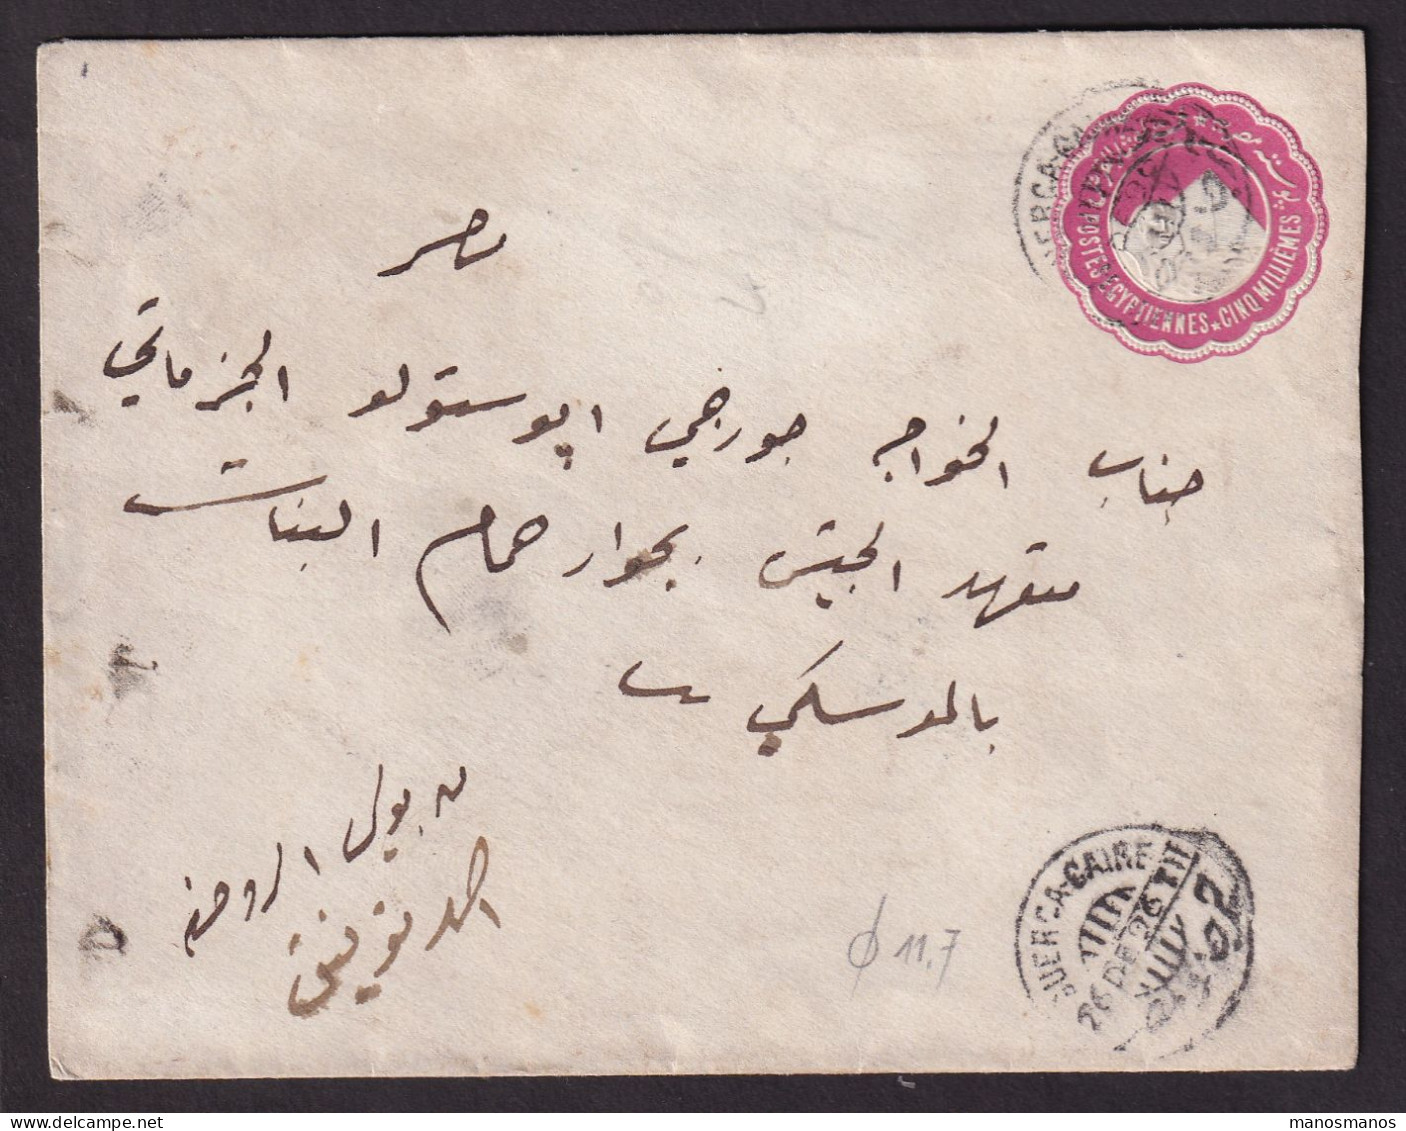 382/31 -- EGYPT GUERGA-CAIRE TPO (Central Diameter 11.7 Mm) - Stationary Envelope Cancelled 1896 To CAIRO - 1866-1914 Khedivate Of Egypt